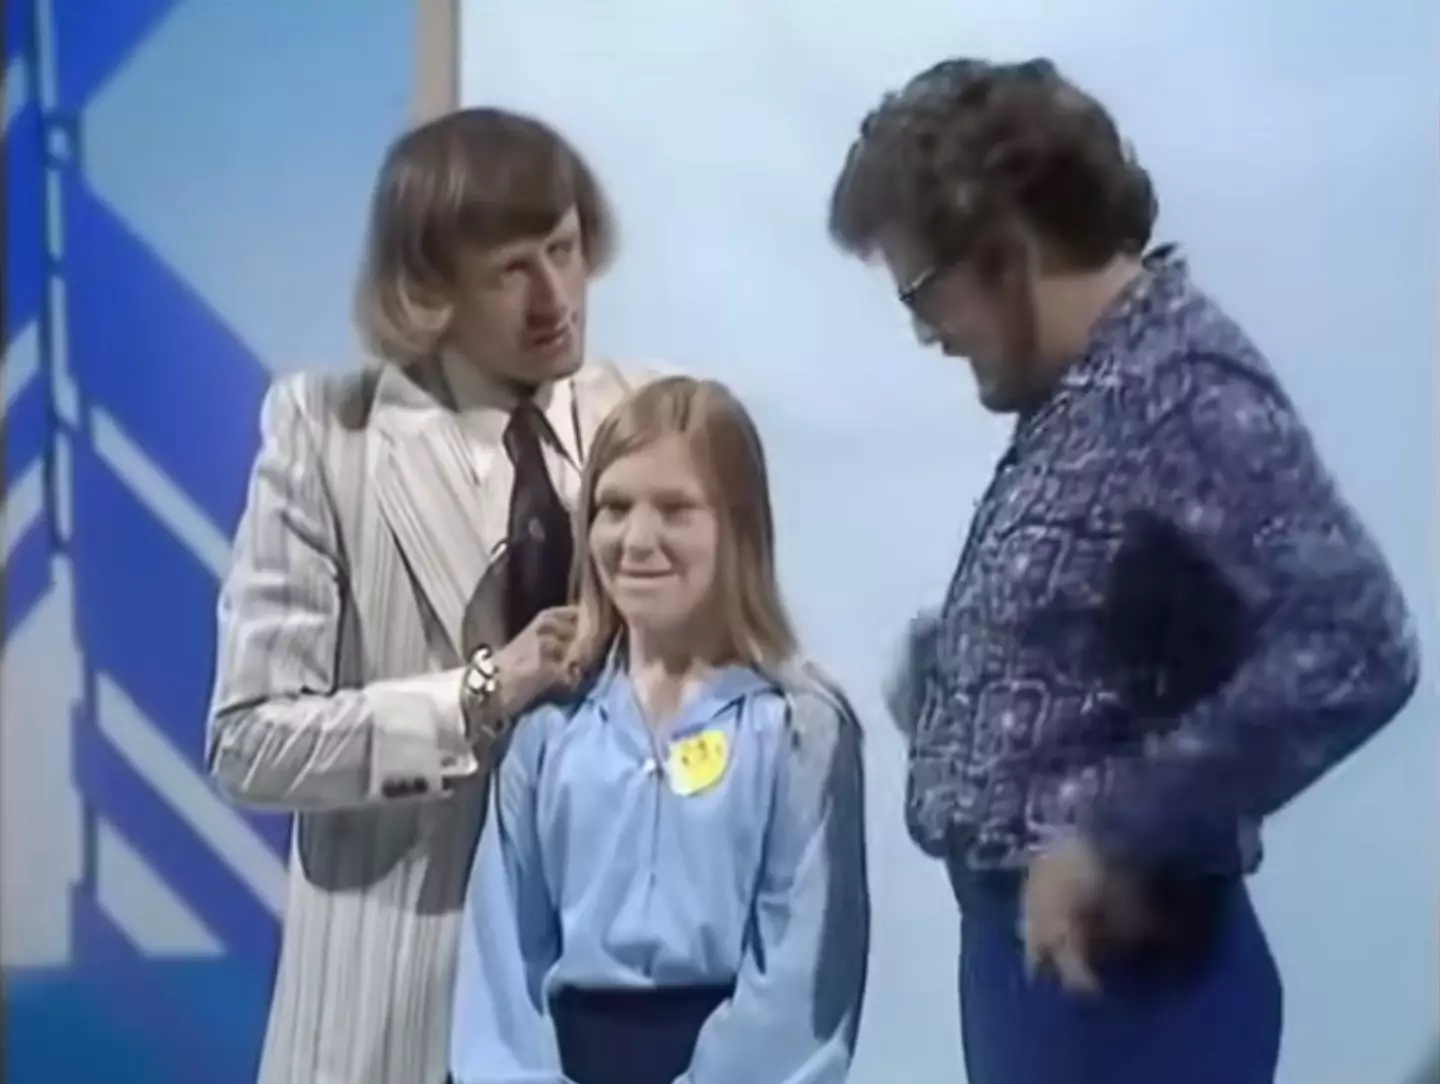 Chilling video of Jimmy Savile and Rolf Harris has resurfaced.